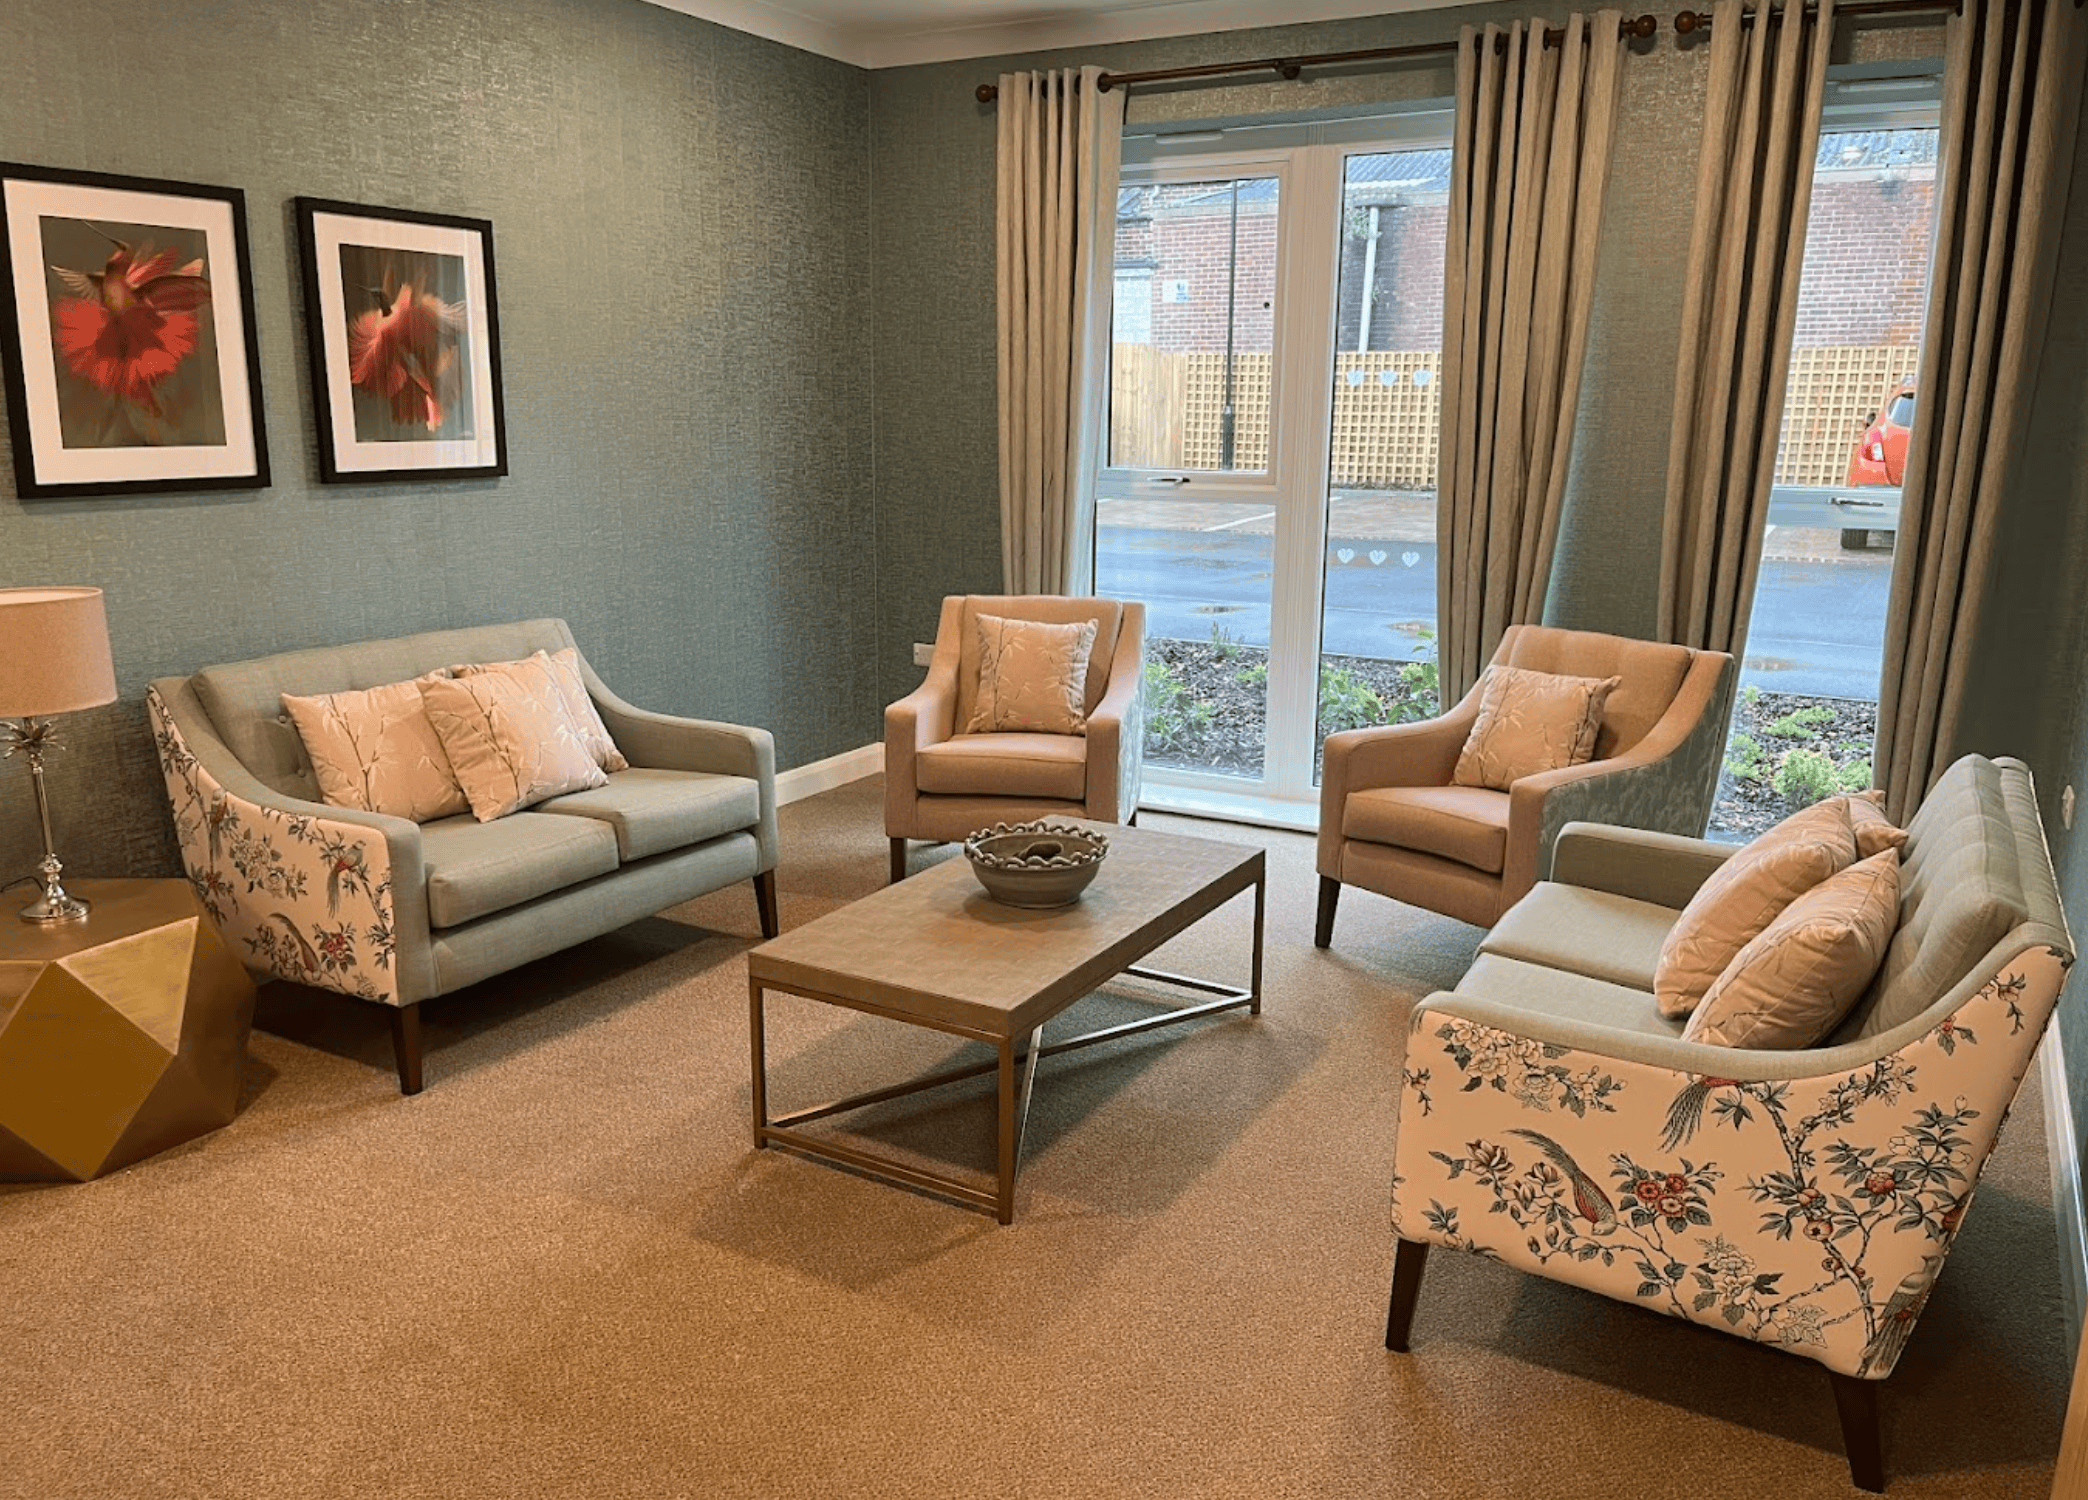 Lounge of Beeston Rise care home in Beeston, Nottinghamshire